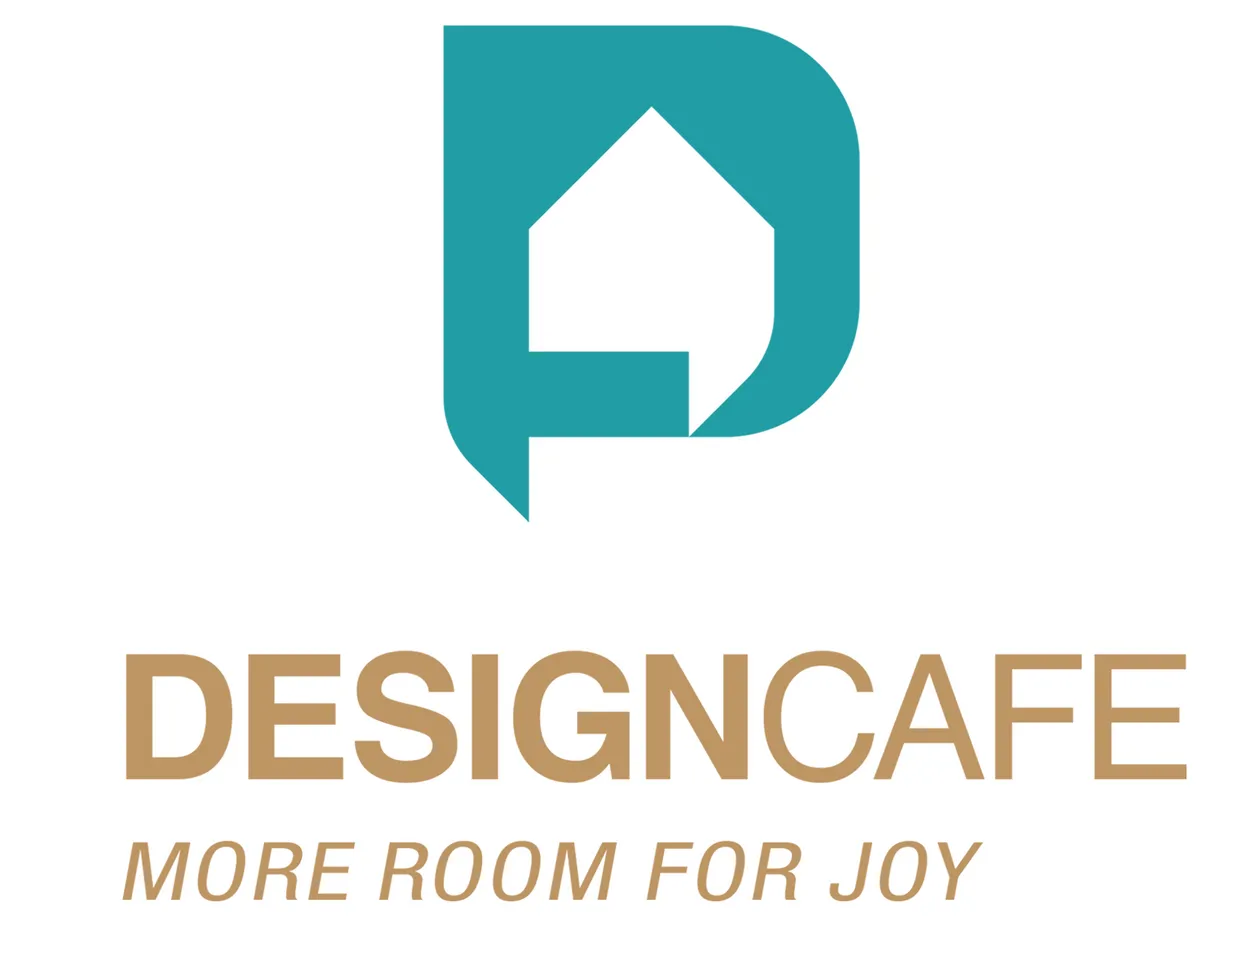 Home interior startup Design Cafe raises Rs 40Cr in a Series B round led by WestBridge Capital, others